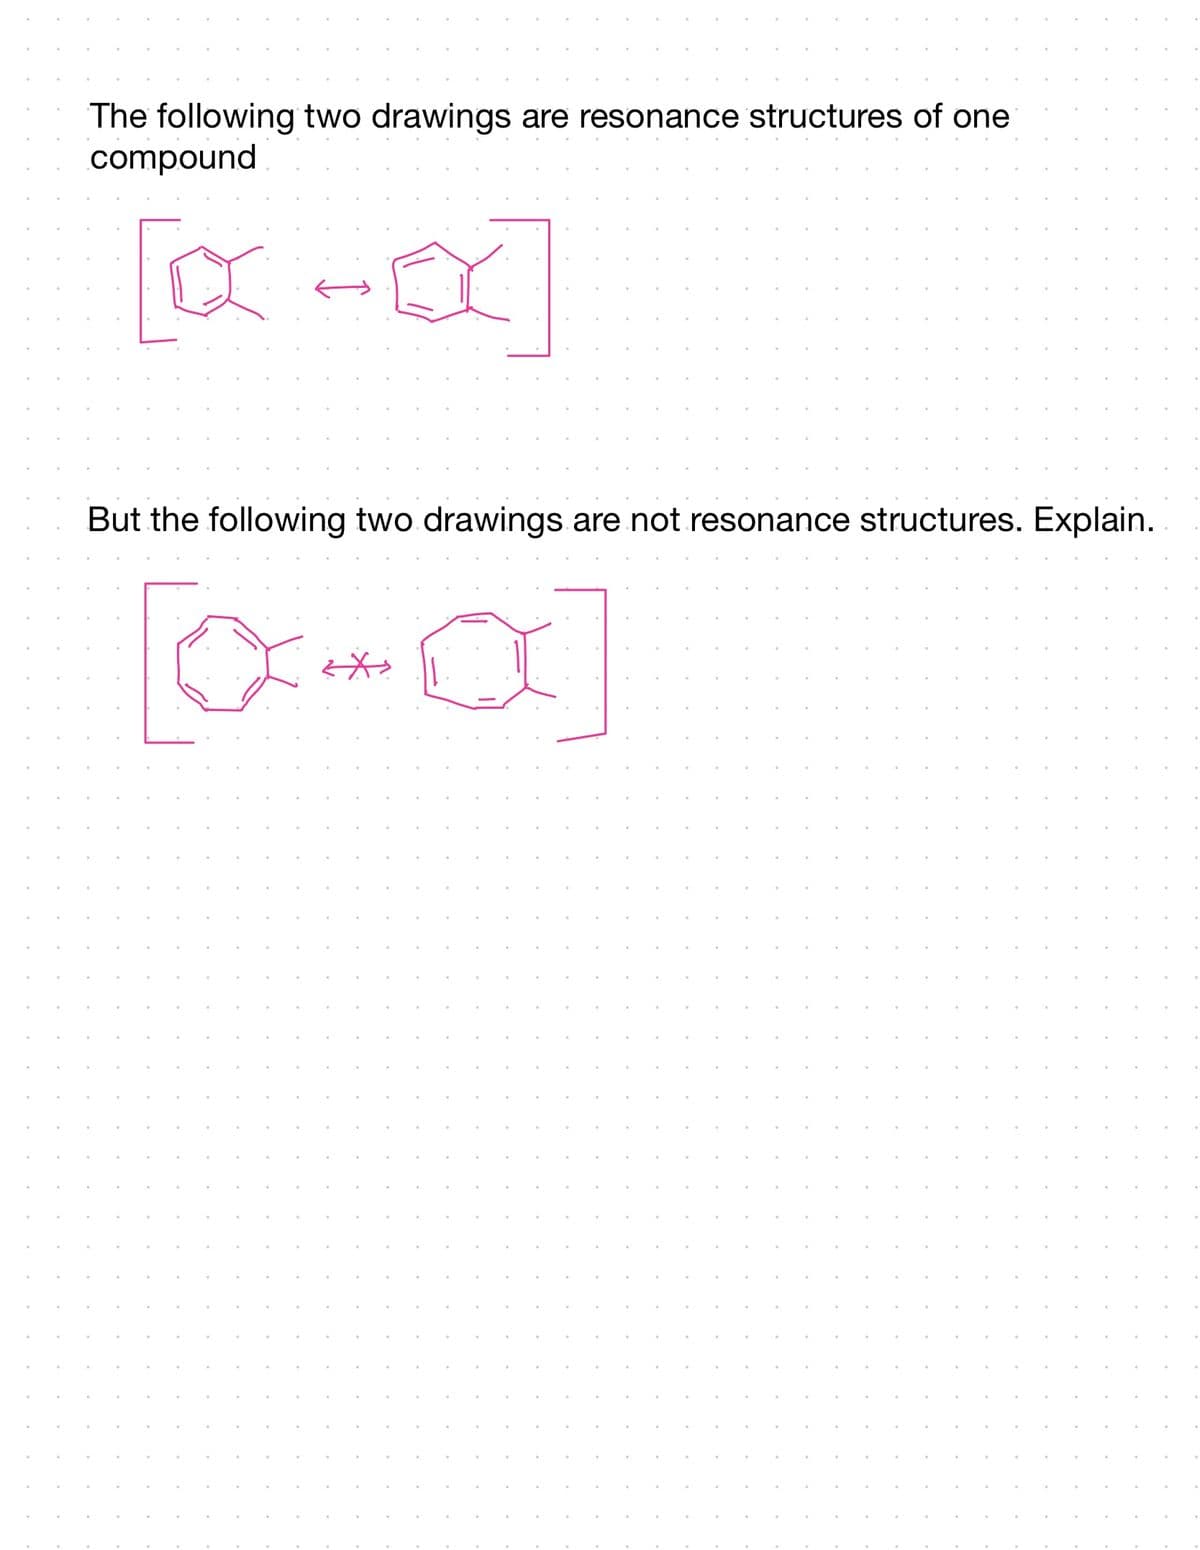 The following two drawings are resonance structures of one
compound
XIX]
But the following two drawings are not resonance structures. Explain.
O
<*>
a